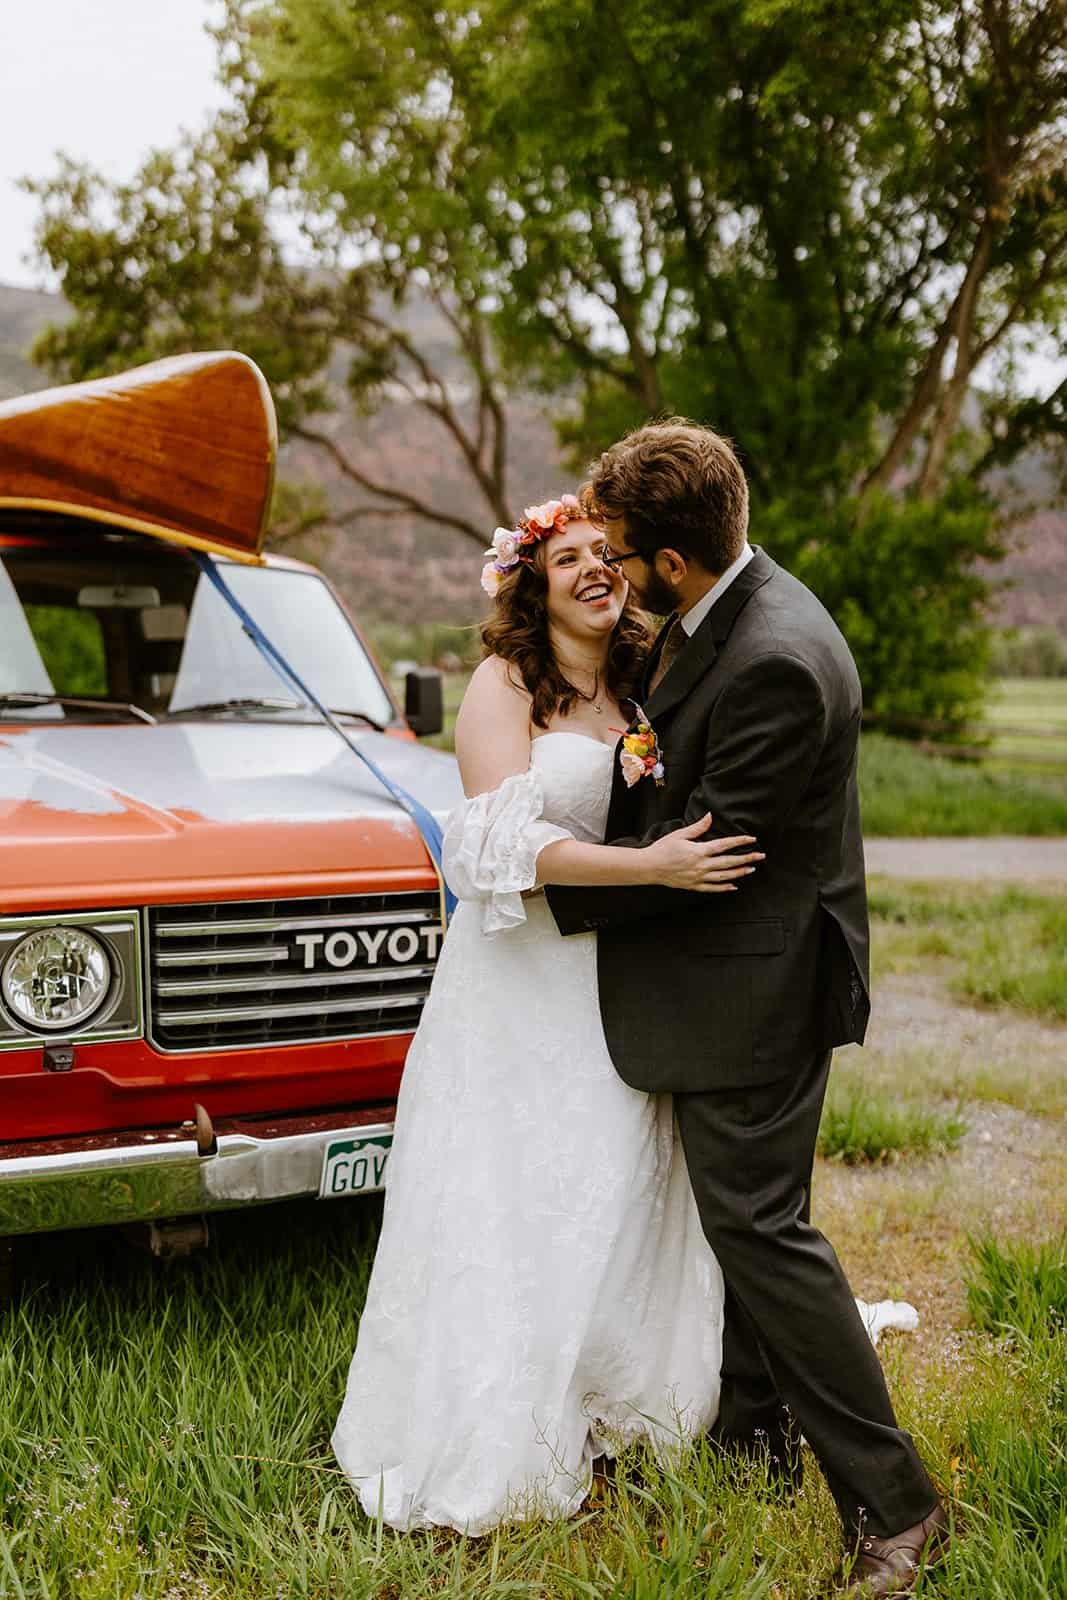 A man and woman in a wedding dress and suit smile and embrace in front of a red Toyota Land Cruiser